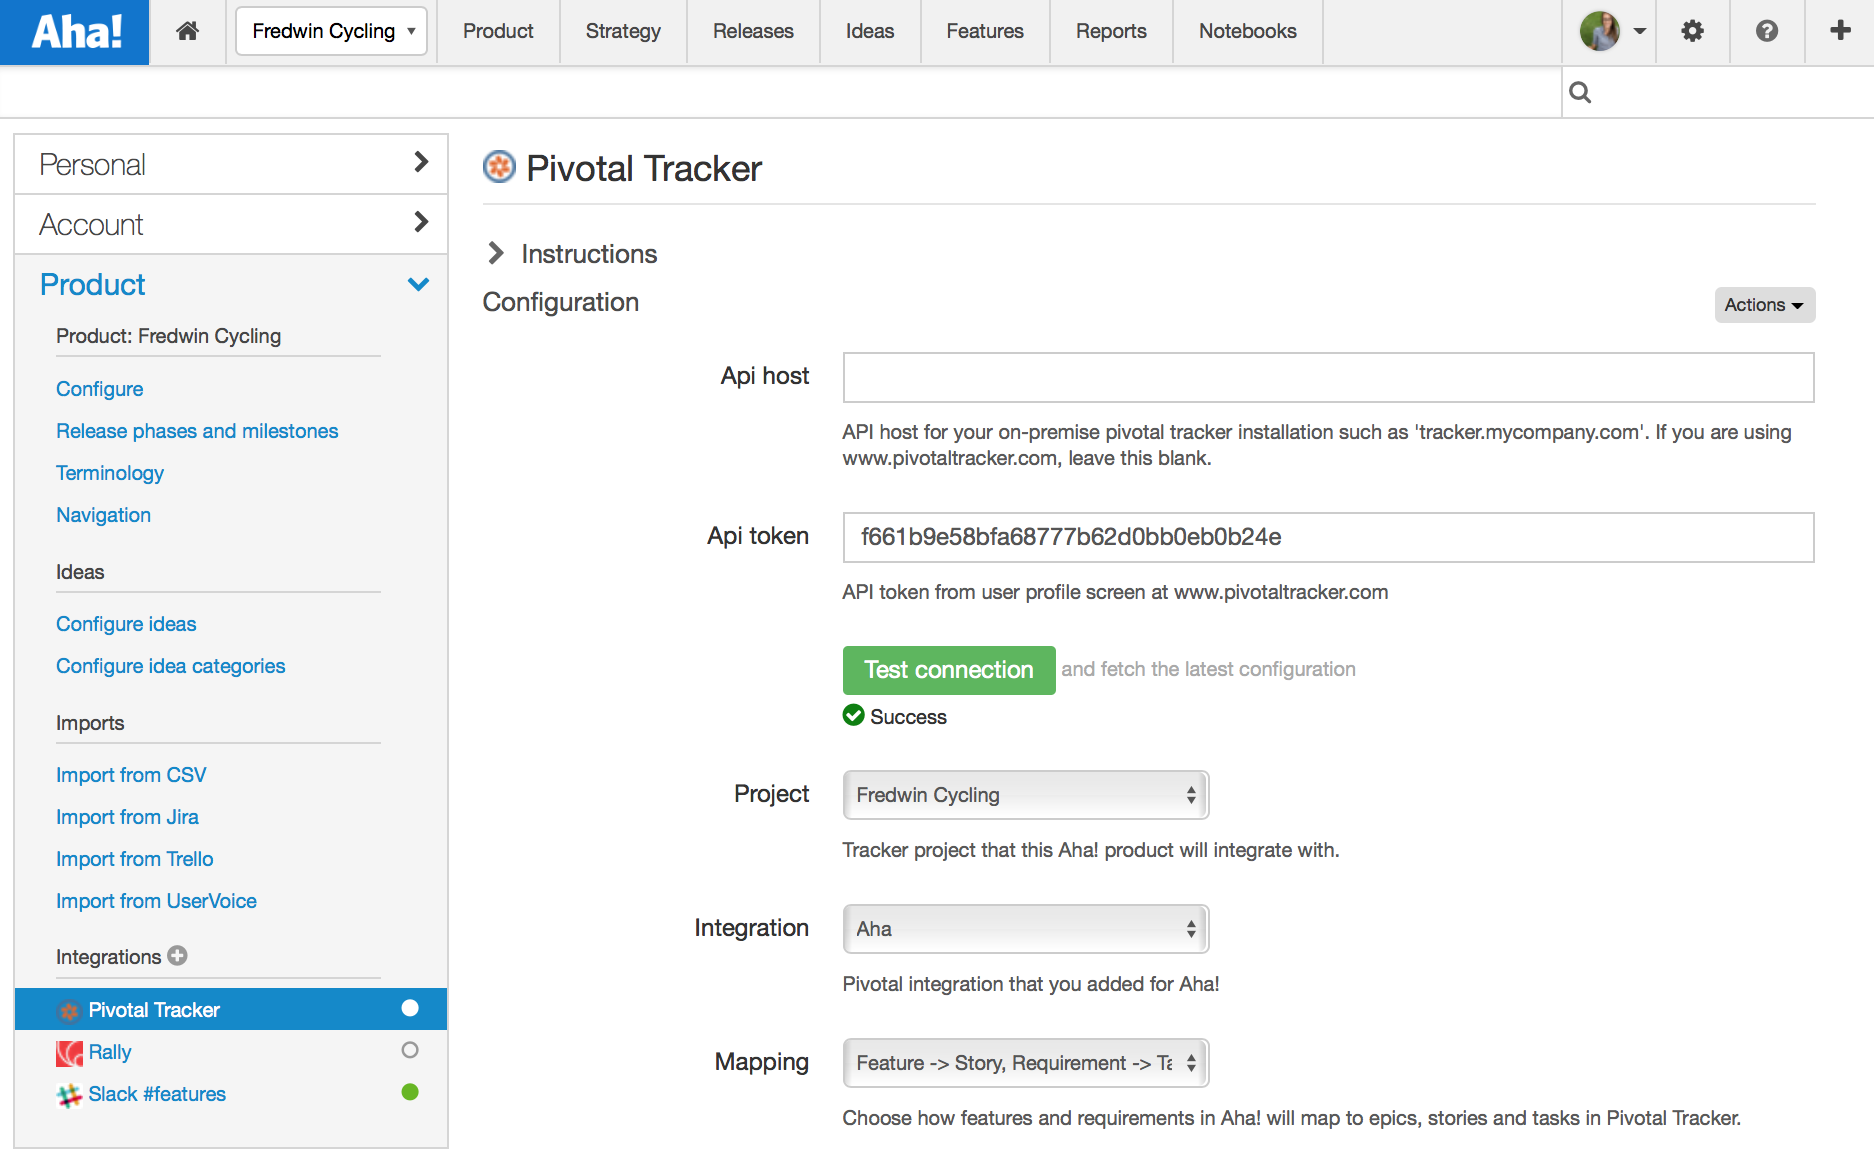 Blog - Aha! Integrated With Pivotal Tracker for Visual Product Roadmaps - inline image